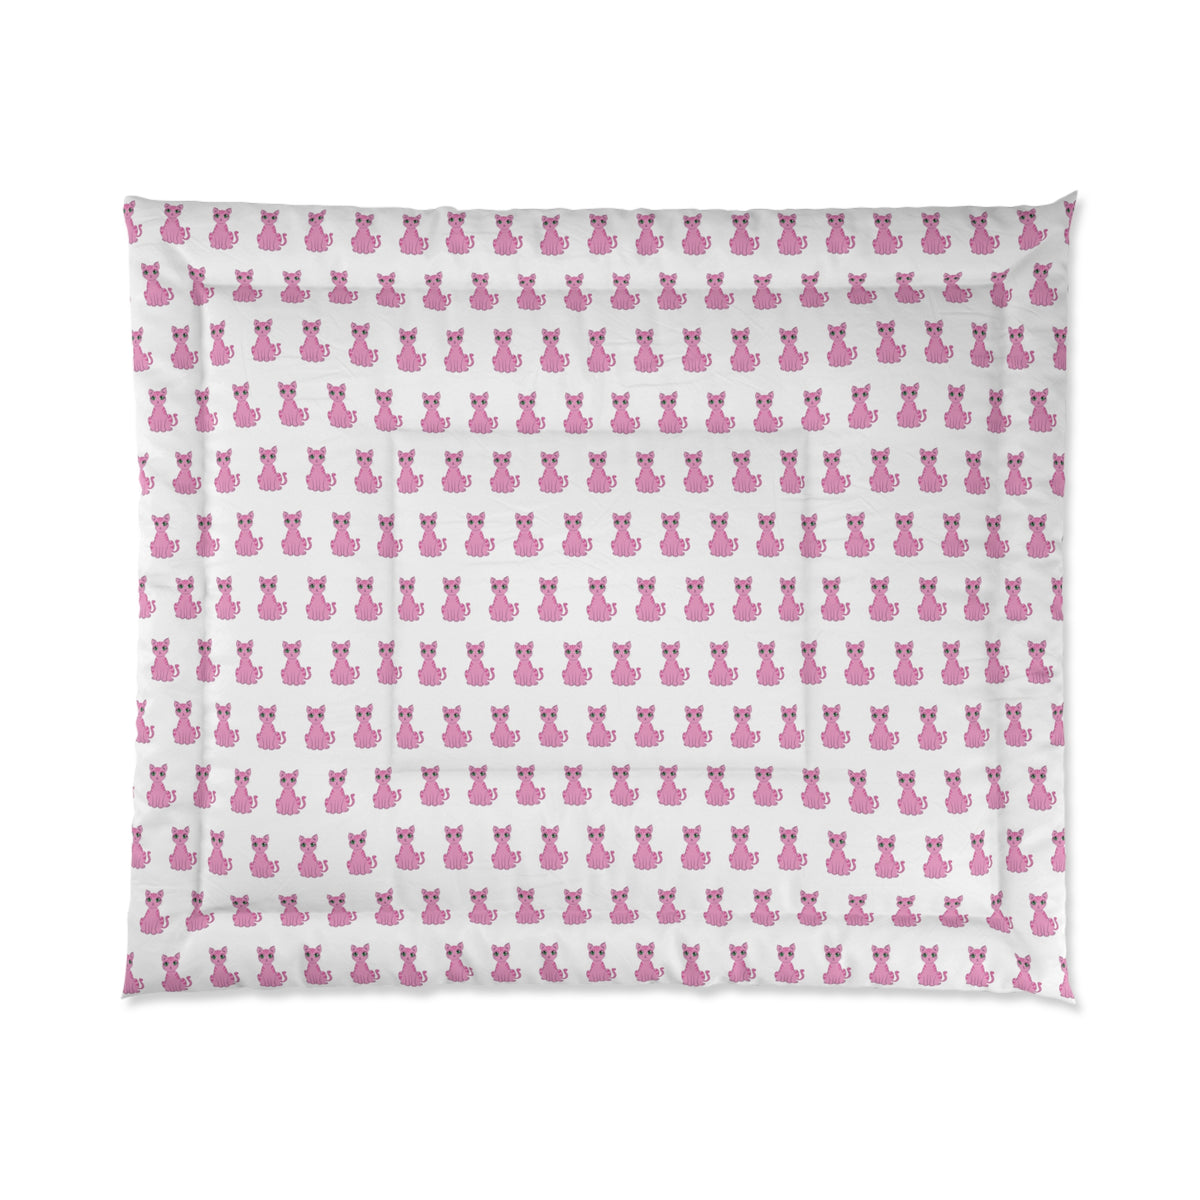 Unique Pink Cat with Green Eyes Pattern Comforter - Lightweight Polyester Bedding - Kawaii Esquire